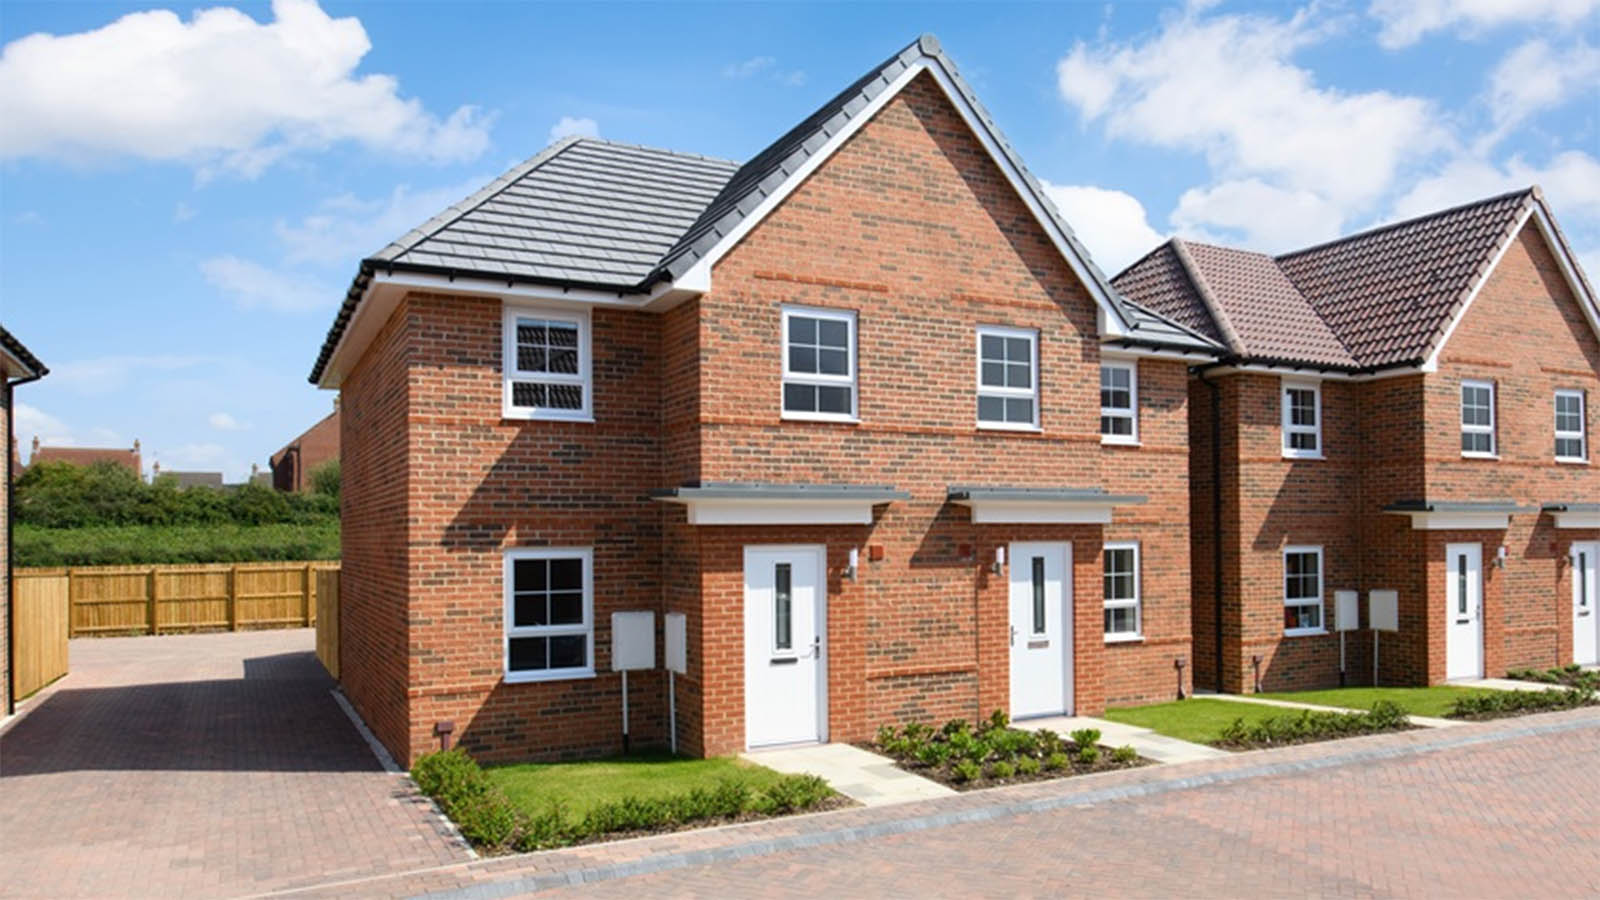 The ‘Palmerston’ house type at Park Edge from Barratt Homes